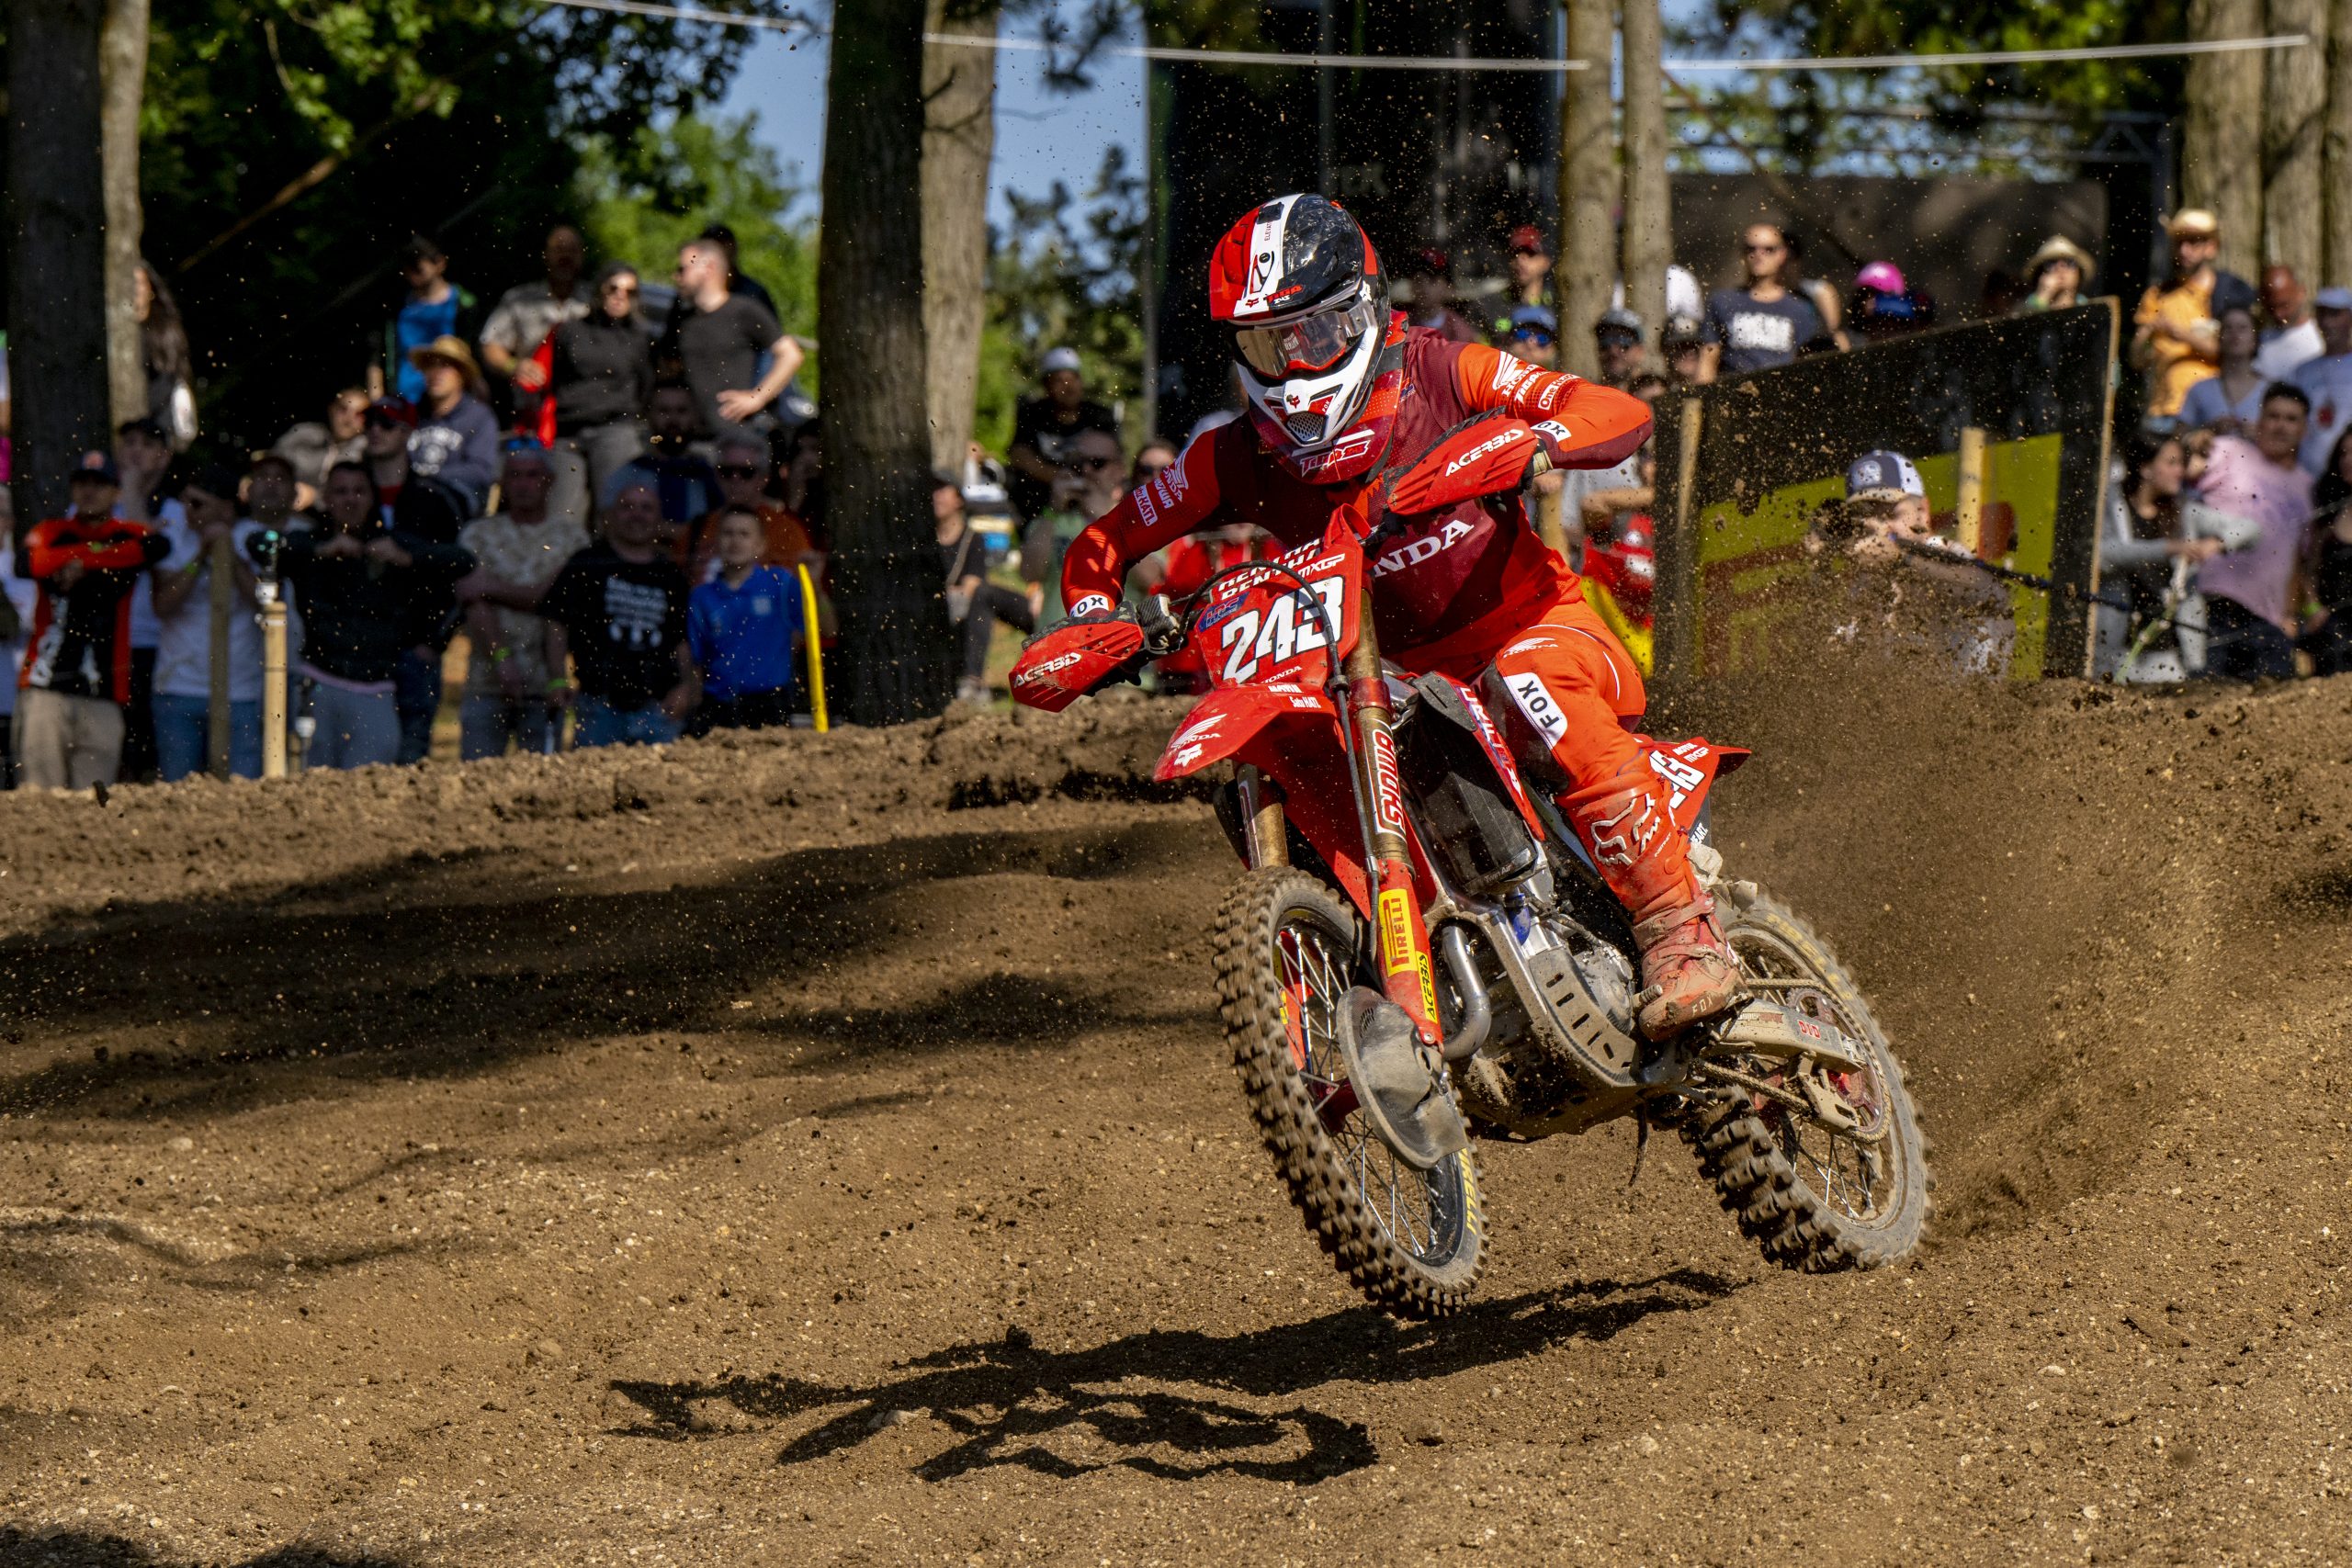 Gajser and Zanchi motivated for more in St Jean D’Angely